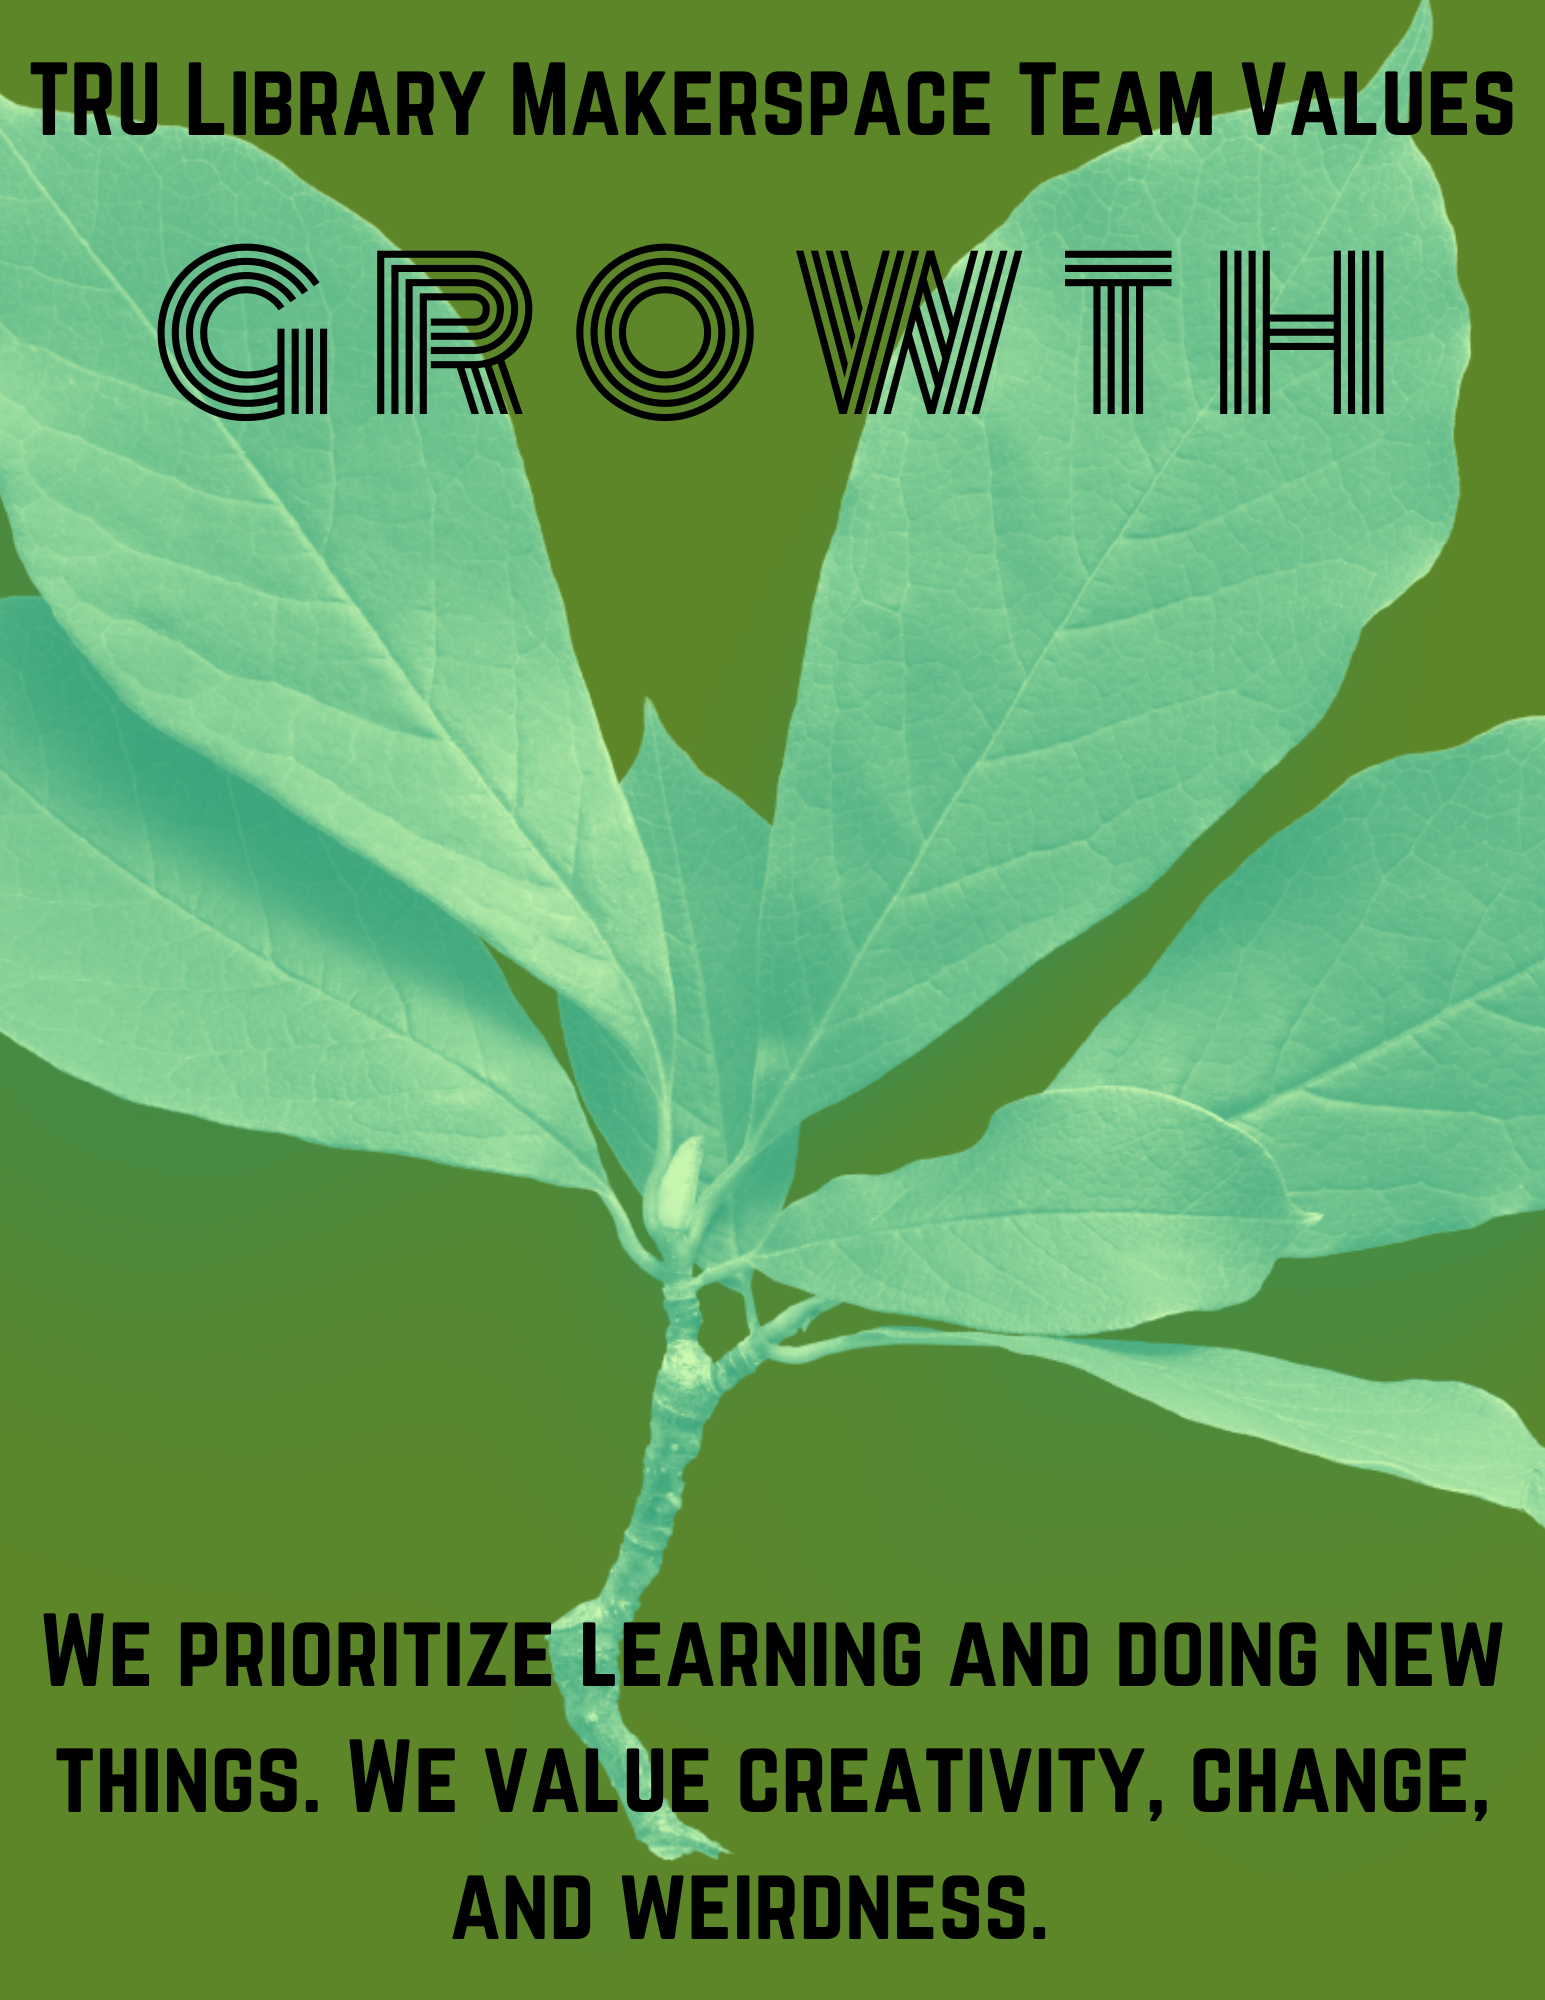 Growth: We prioritize learning and doing new things. We value creativity, change, and weirdness.